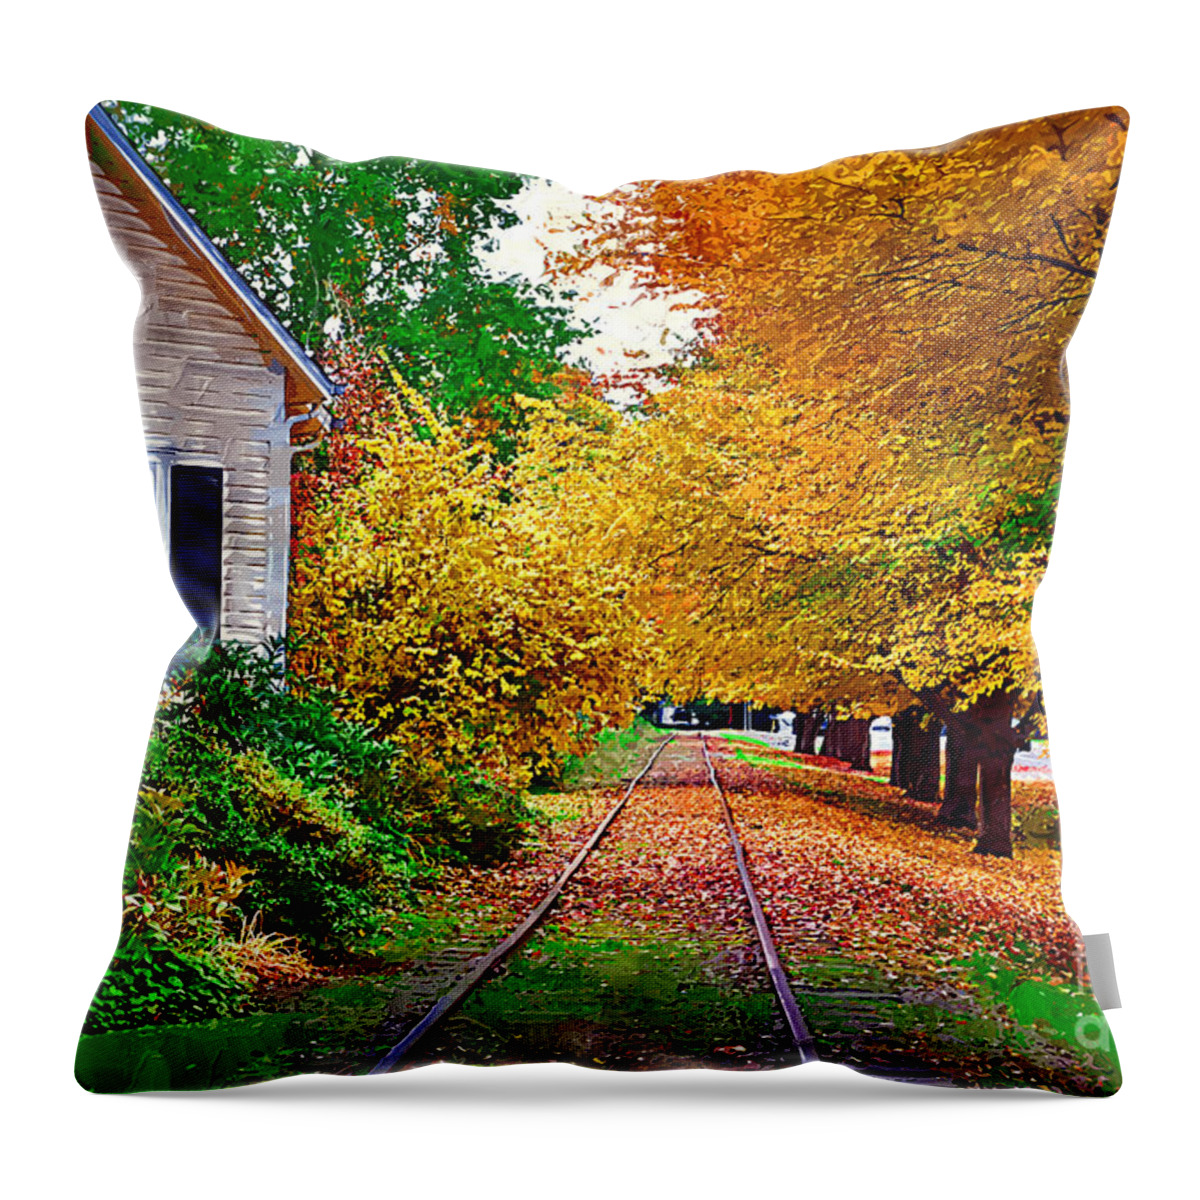 Autumn-foliage Throw Pillow featuring the painting Tracks By The House by Kirt Tisdale